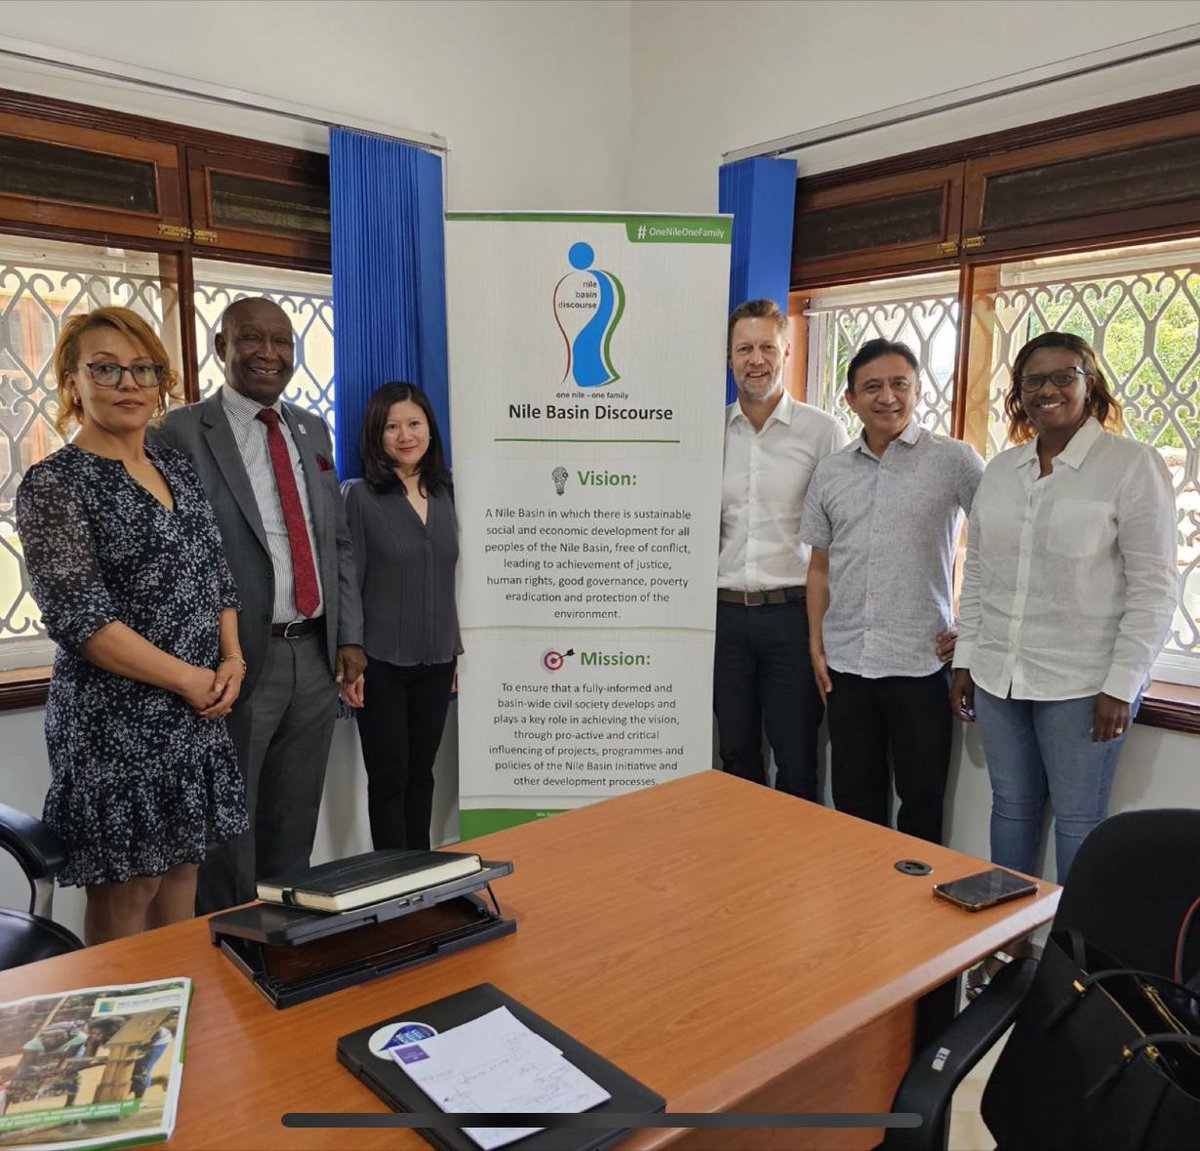 The @NileBasin Discourse & @CIWAprogram have been facilitating grassroots participation in transboundary water management in the #Nile Basin for over a decade. Here, program managers @HuangAiju & @AndersJagerskog visited colleagues at the NEW NBD offices in Entebbe, #Uganda! 🇺🇬